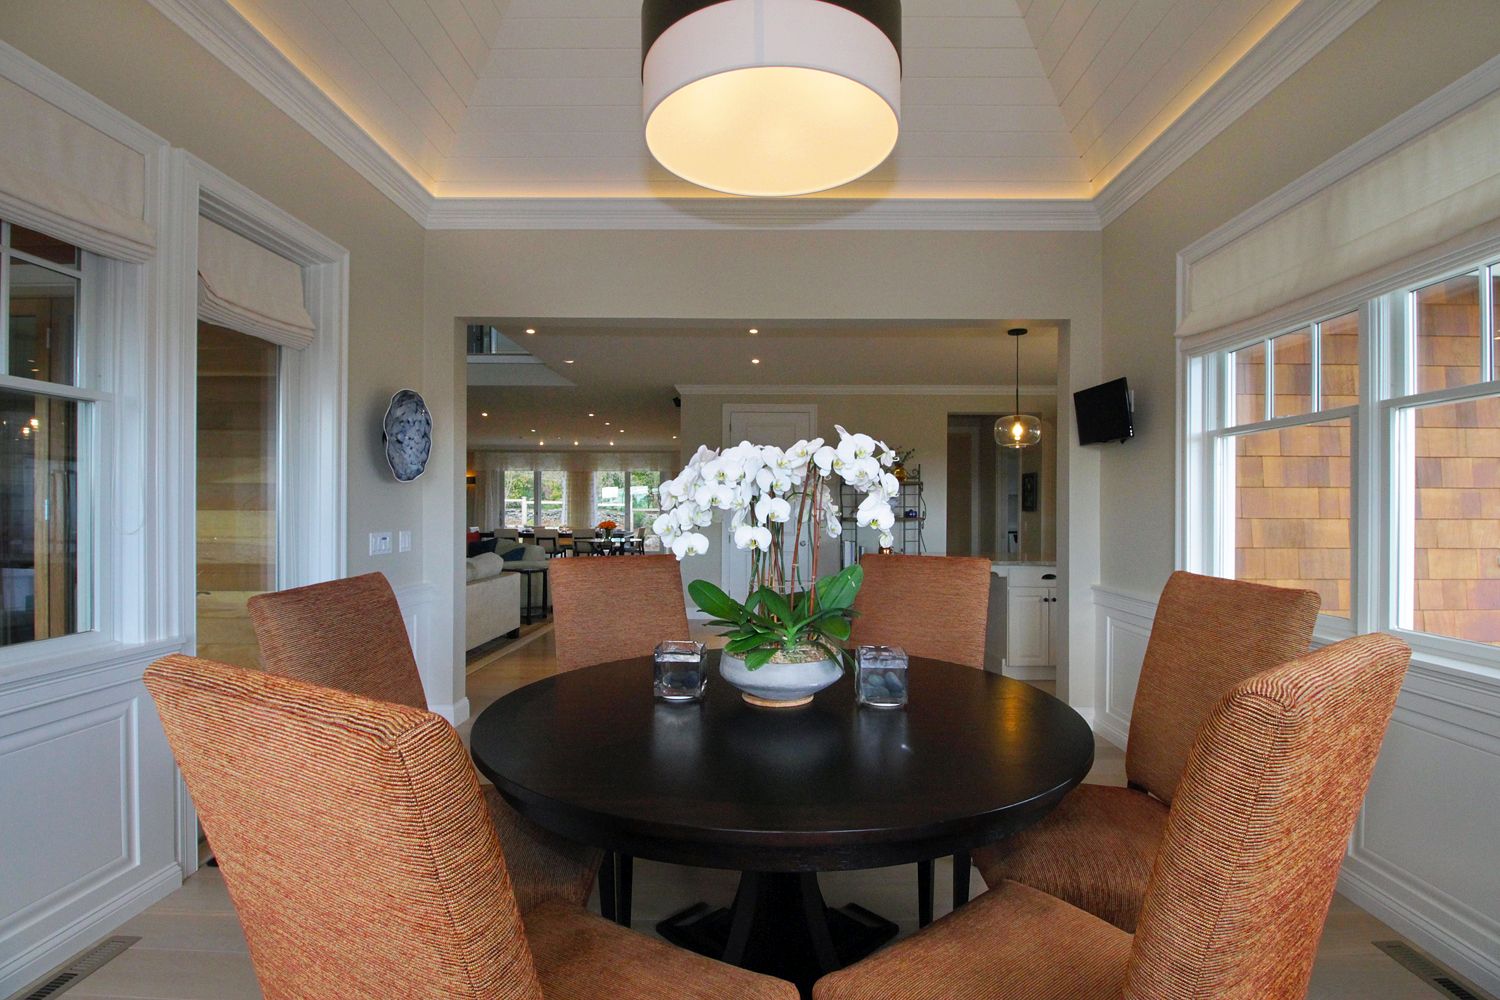 Interior dining lighting and electrical wiring luxury home middletown rhode island